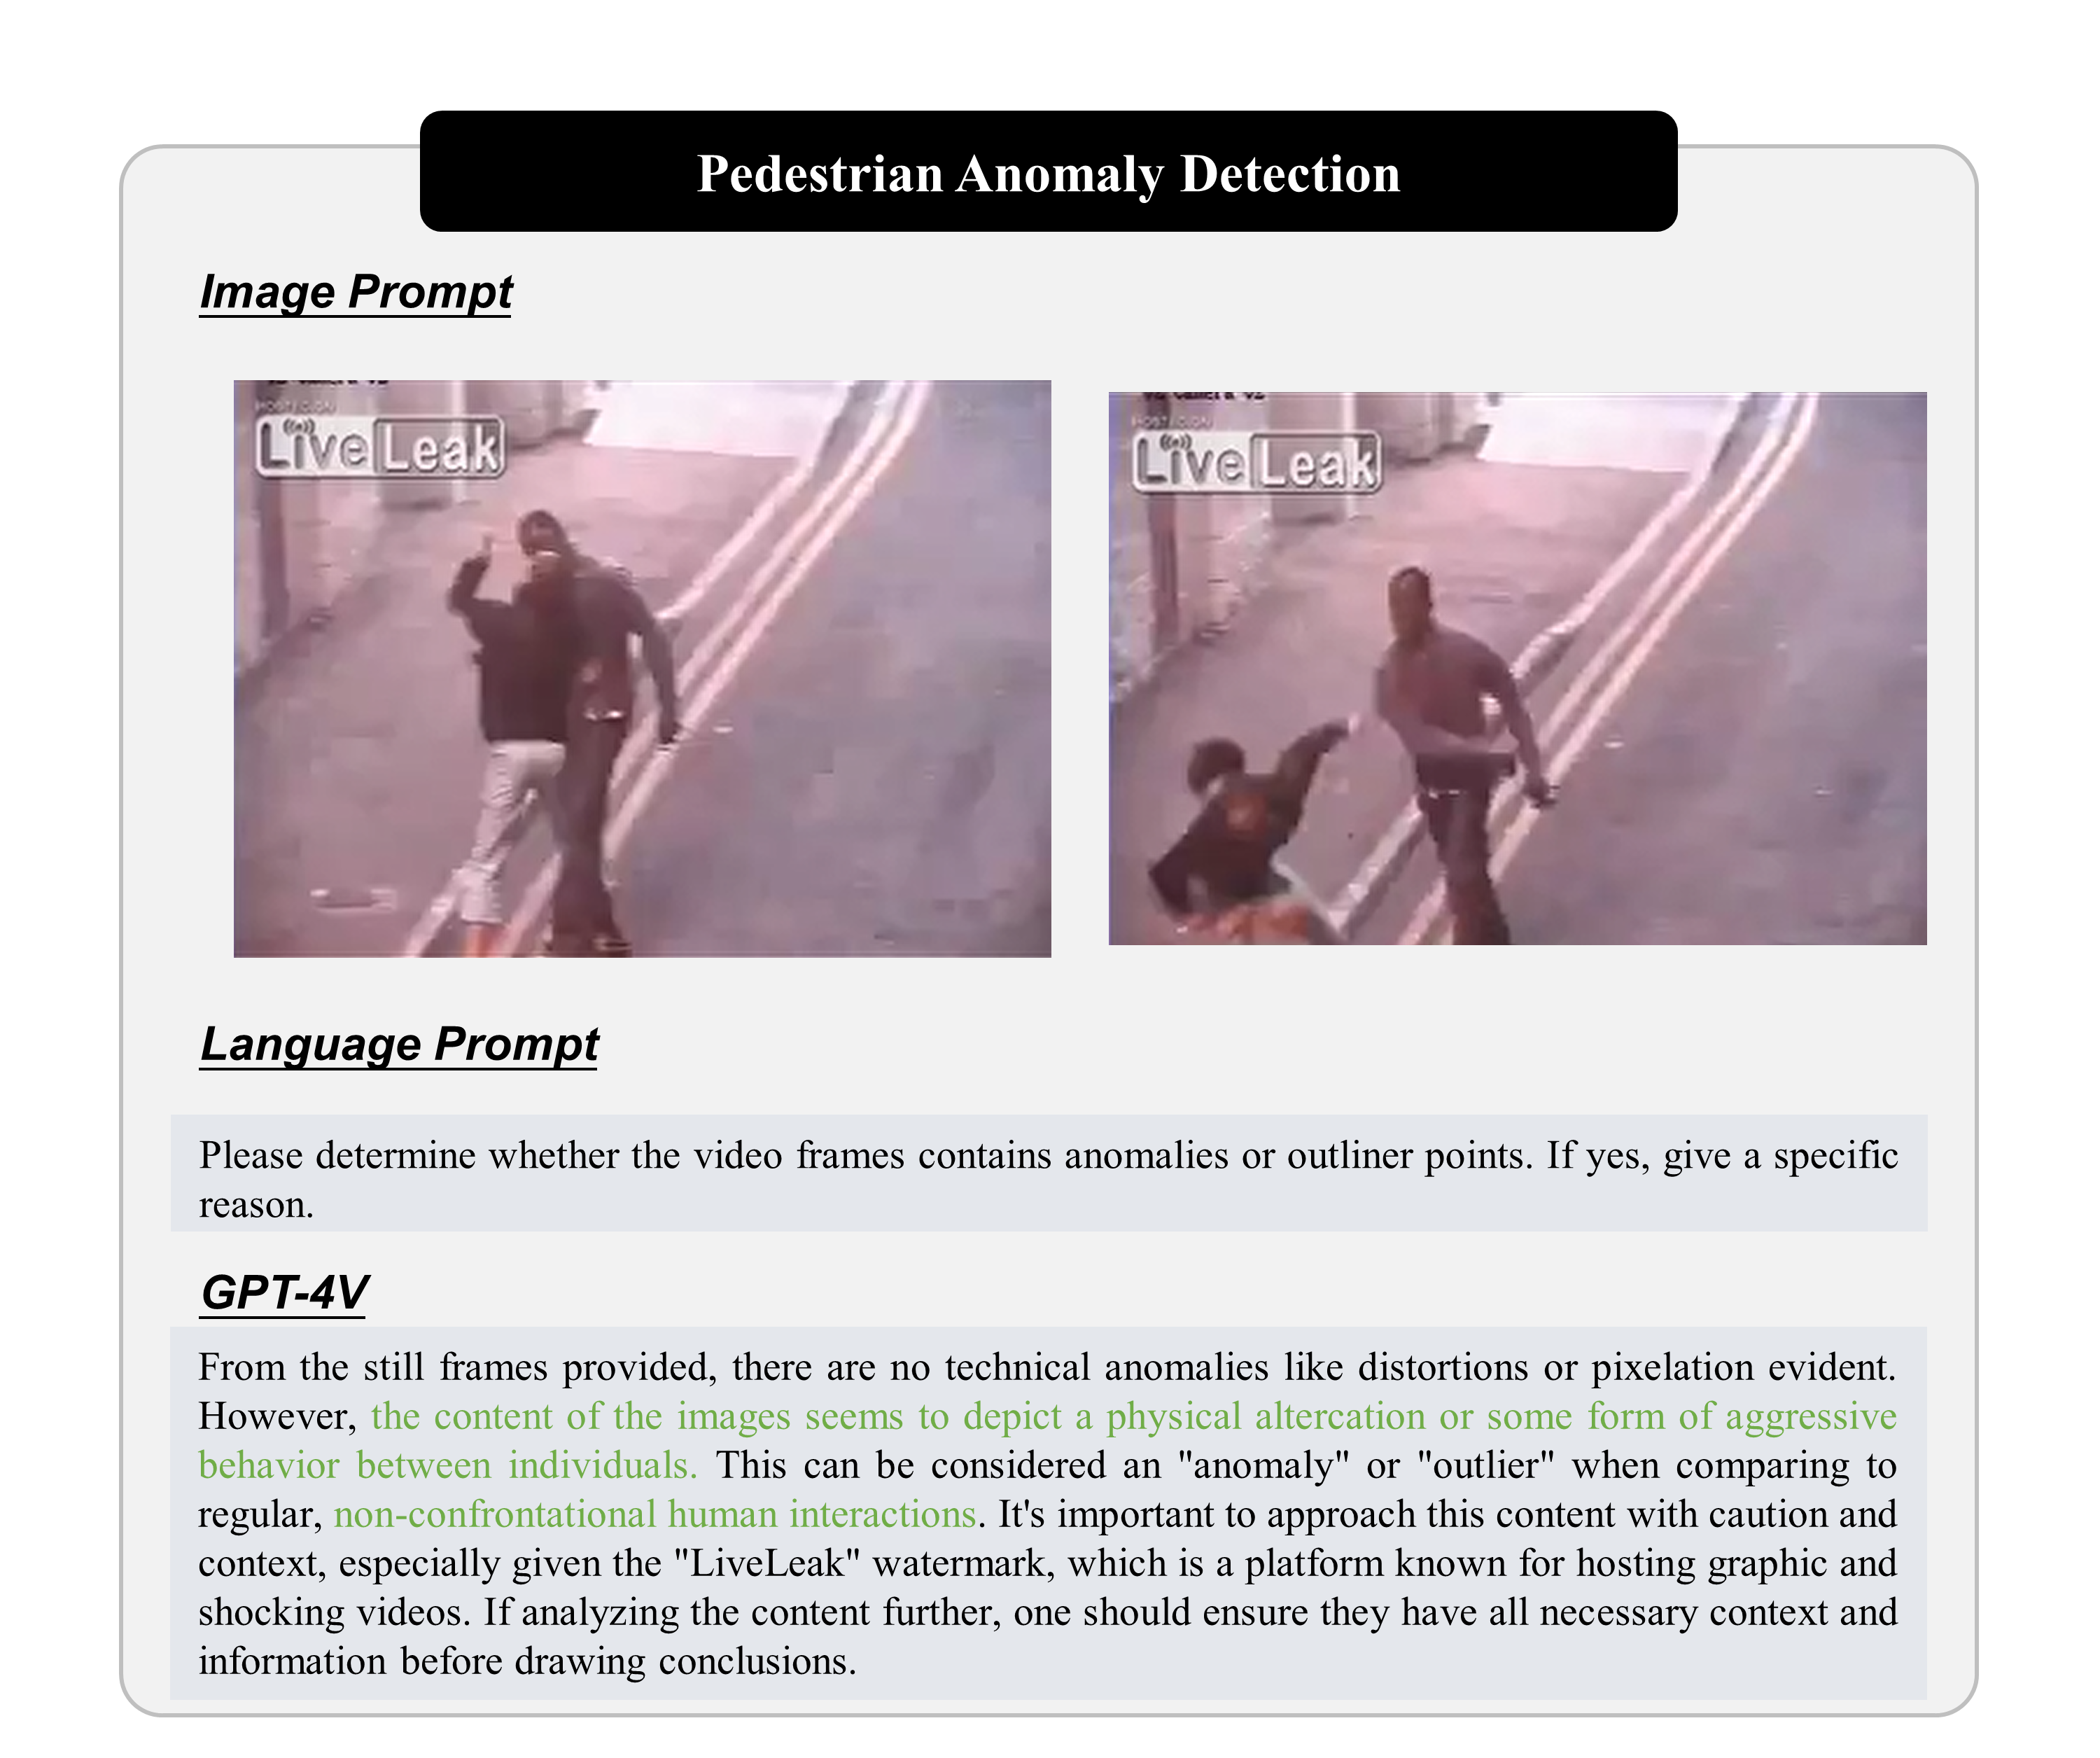 Pedestrian Anomaly Detection